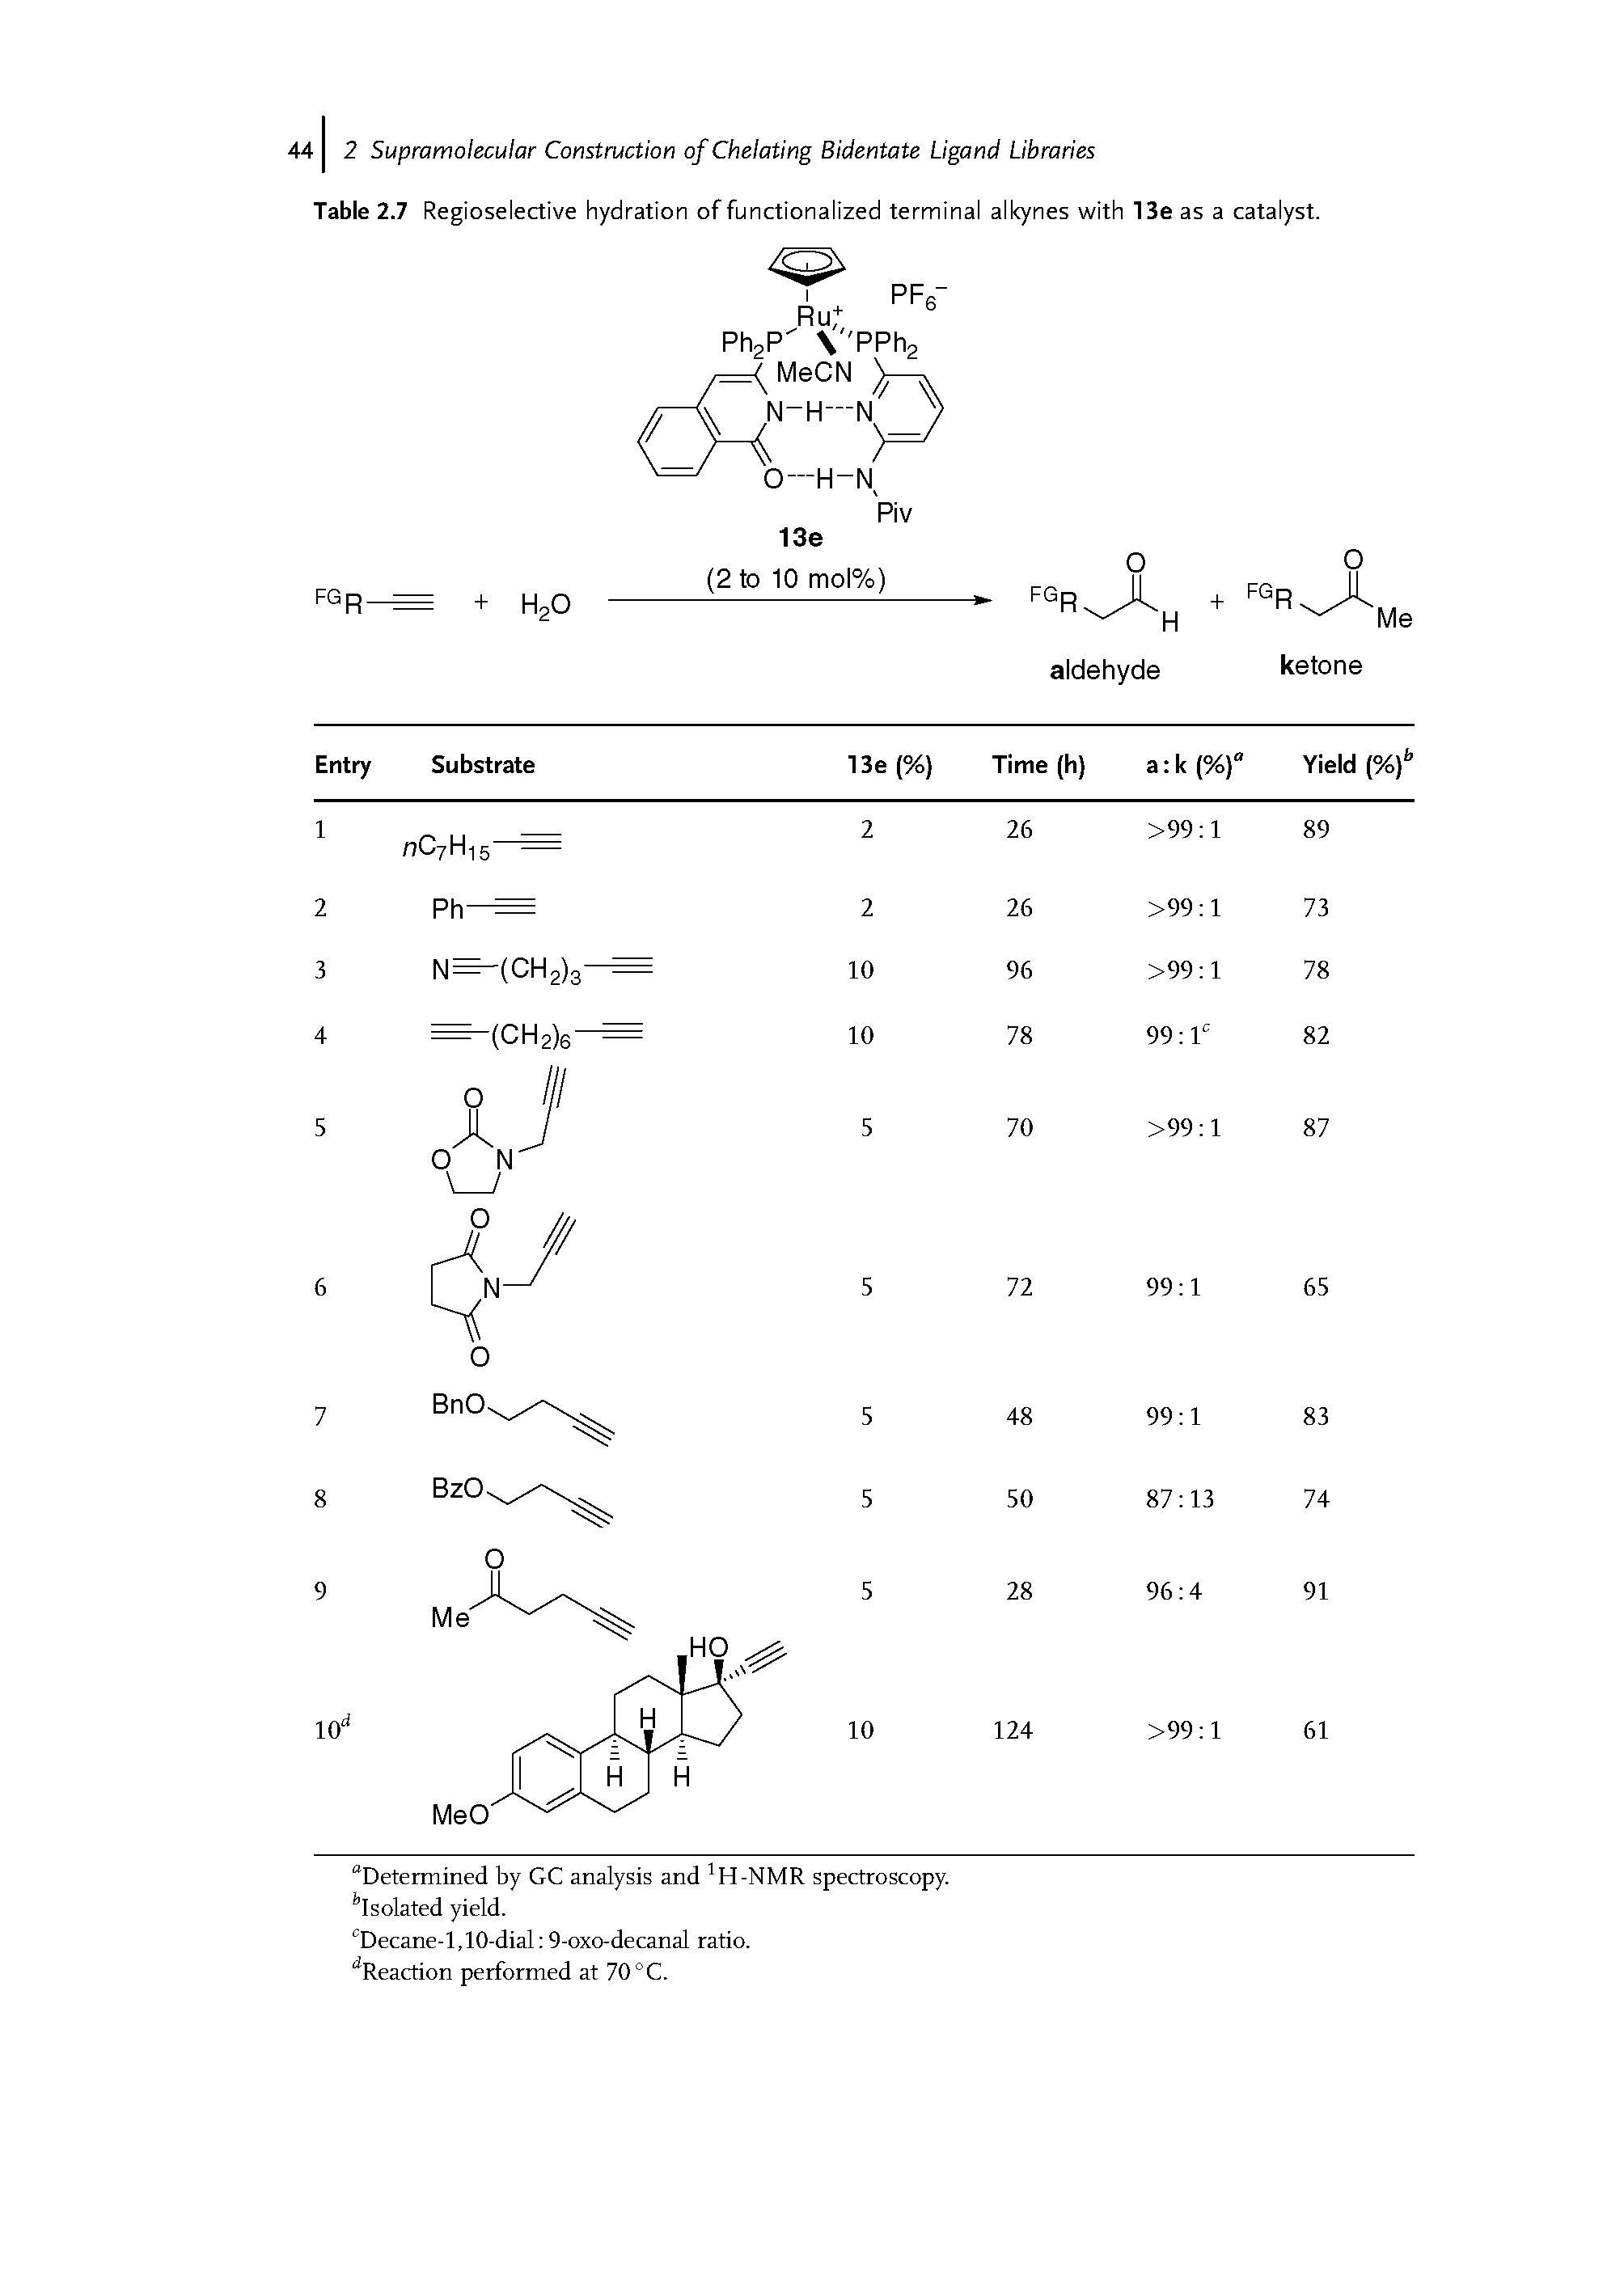 Table 2.7 Regioselective hydration of functionalized terminal alkynes with 13e as a catalyst.